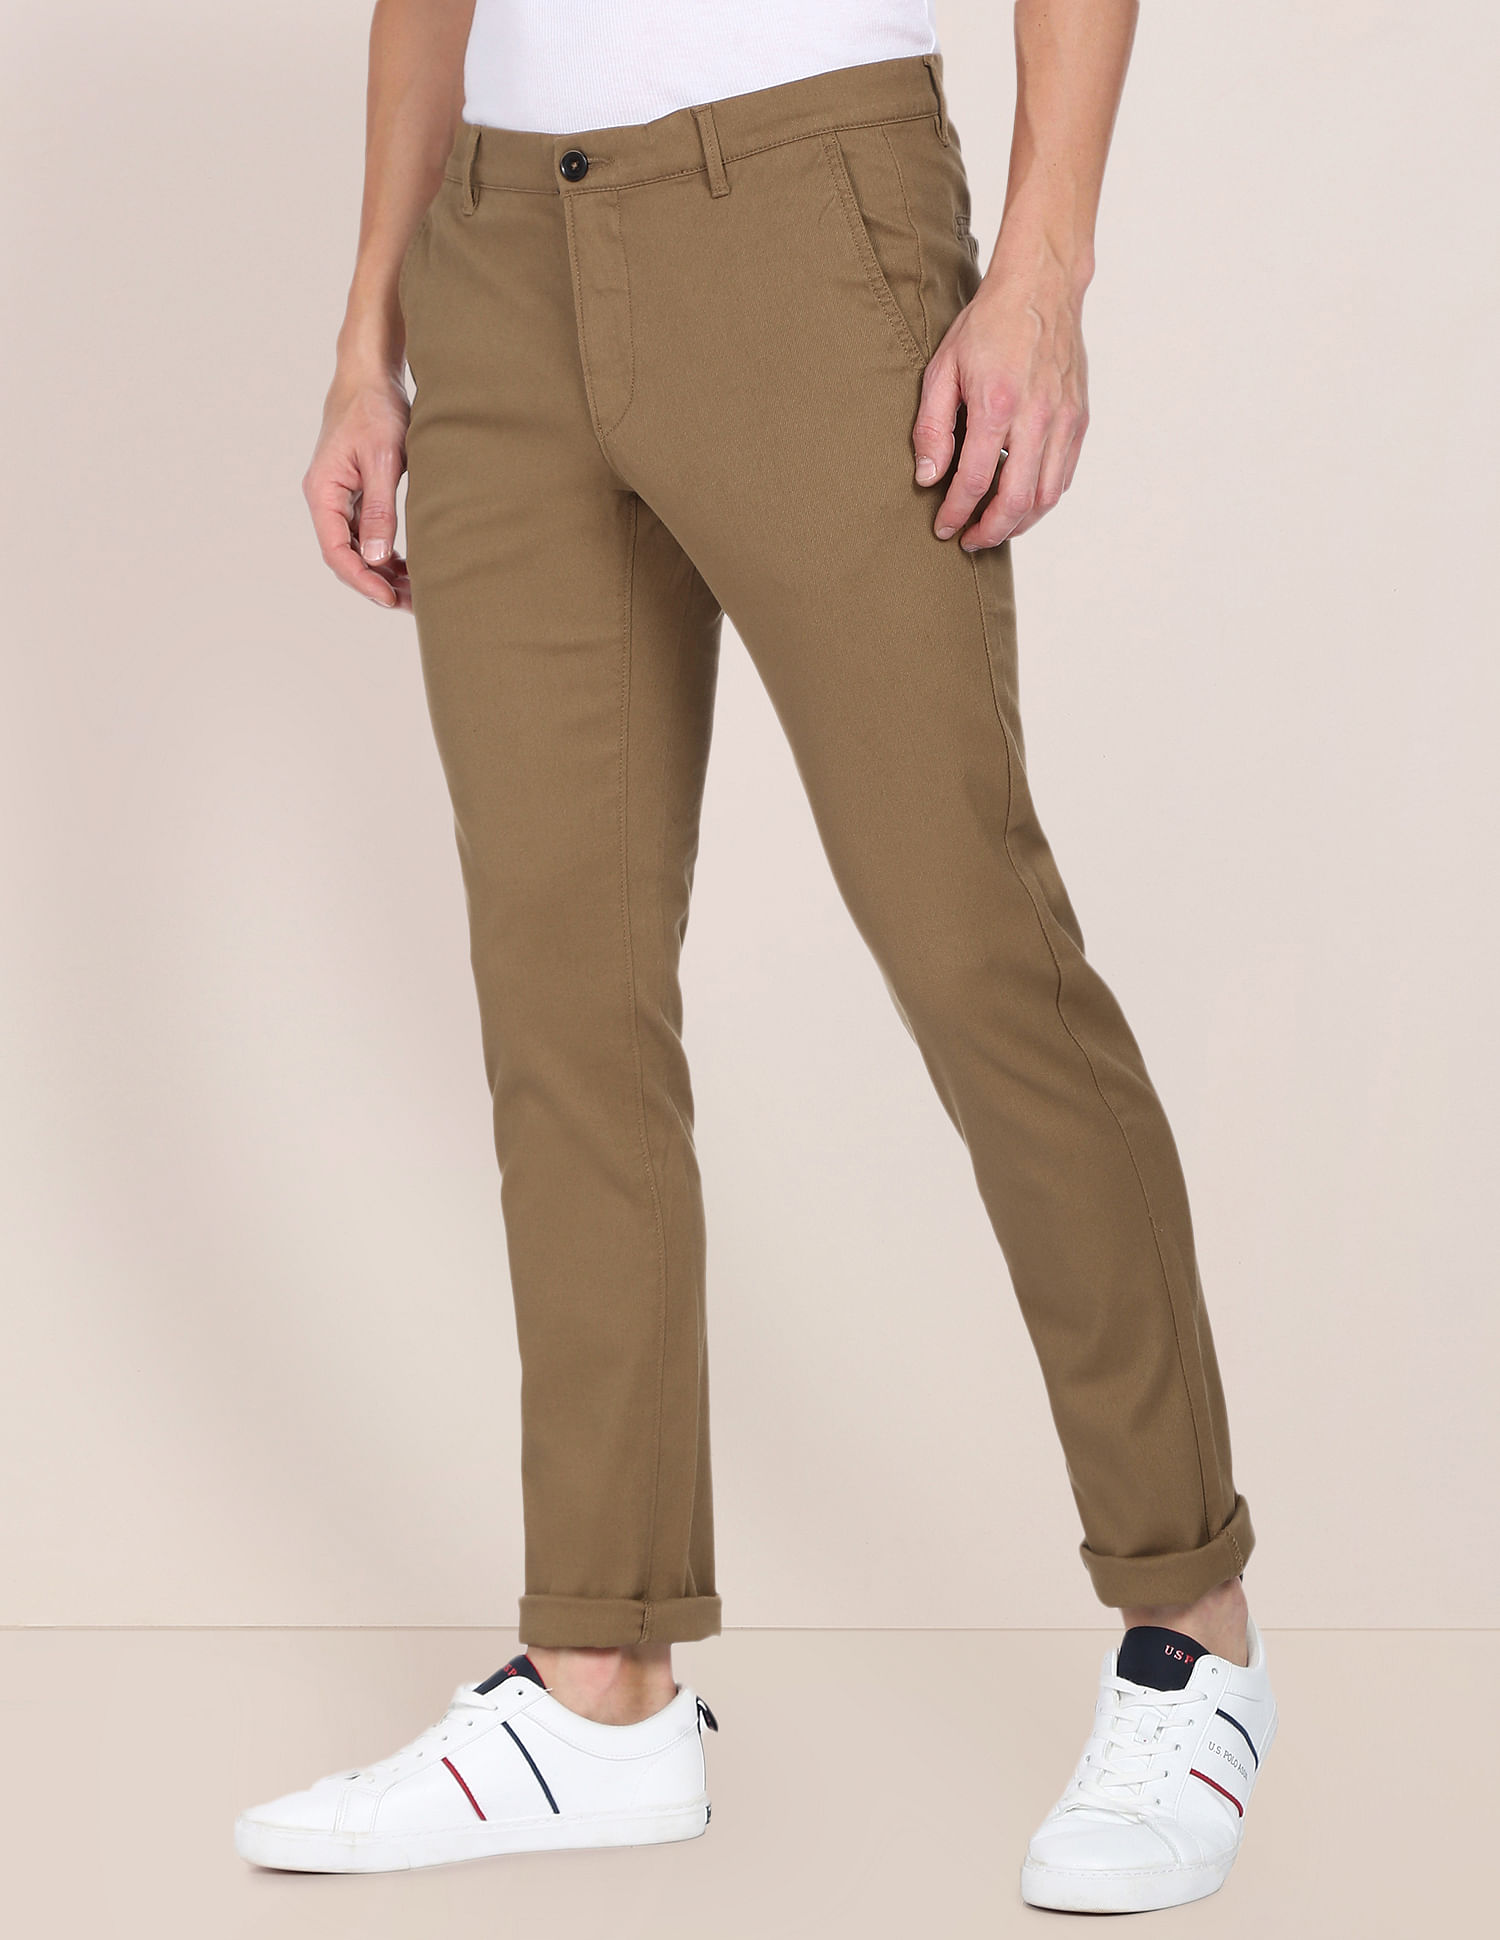 Buy US POLO ASSN Natural Solid Cotton Stretch Regular Fit Mens Trousers   Shoppers Stop